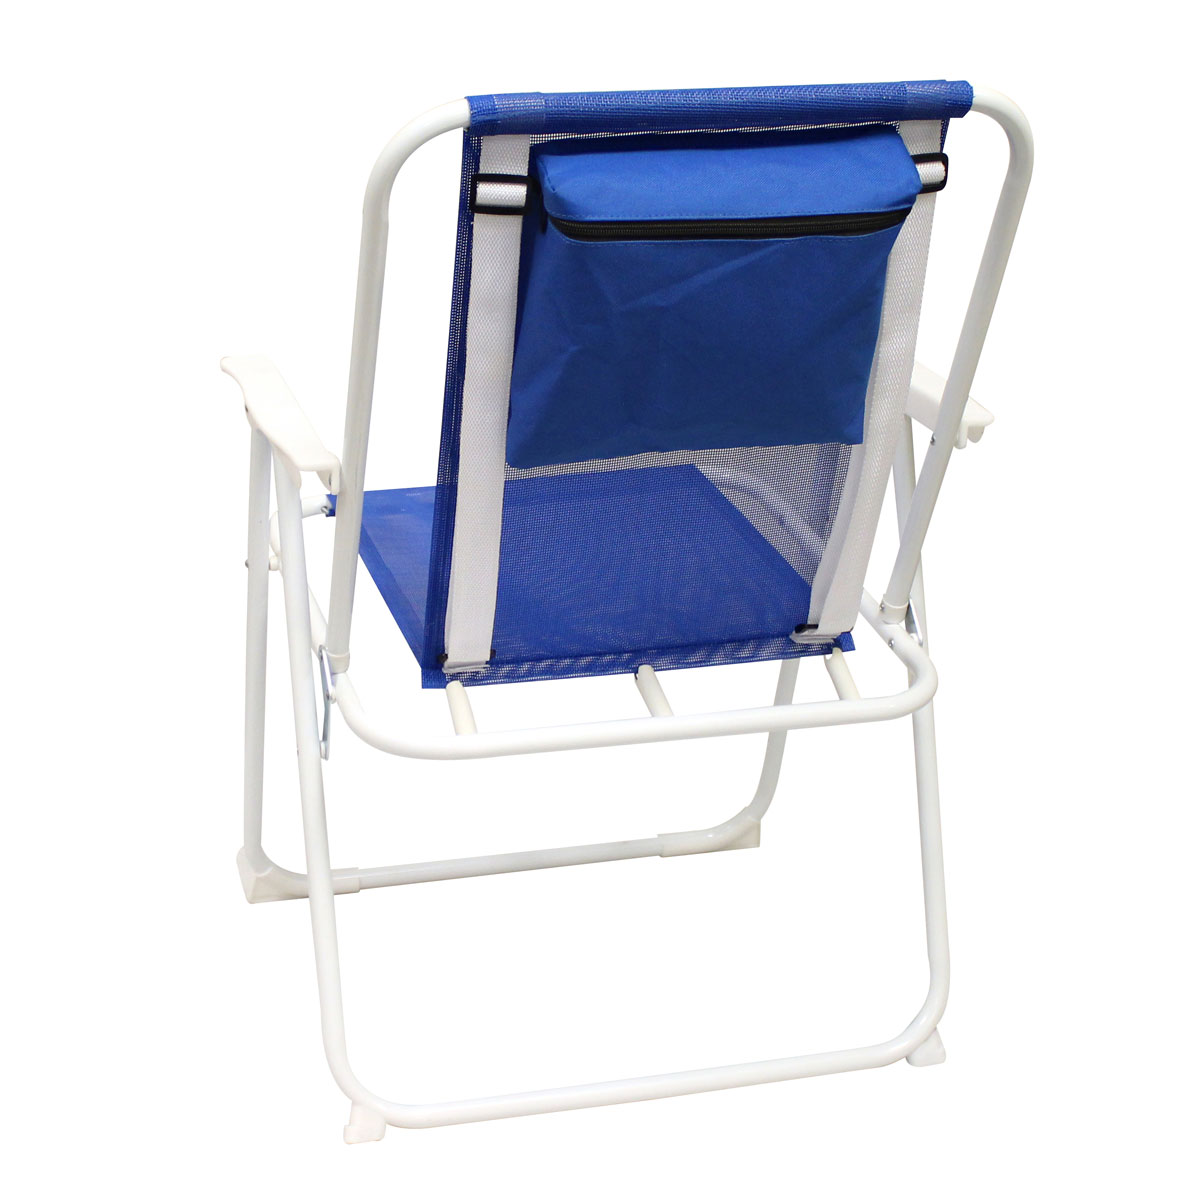 Preferred Nation Portable Beach Chair - image 2 of 2